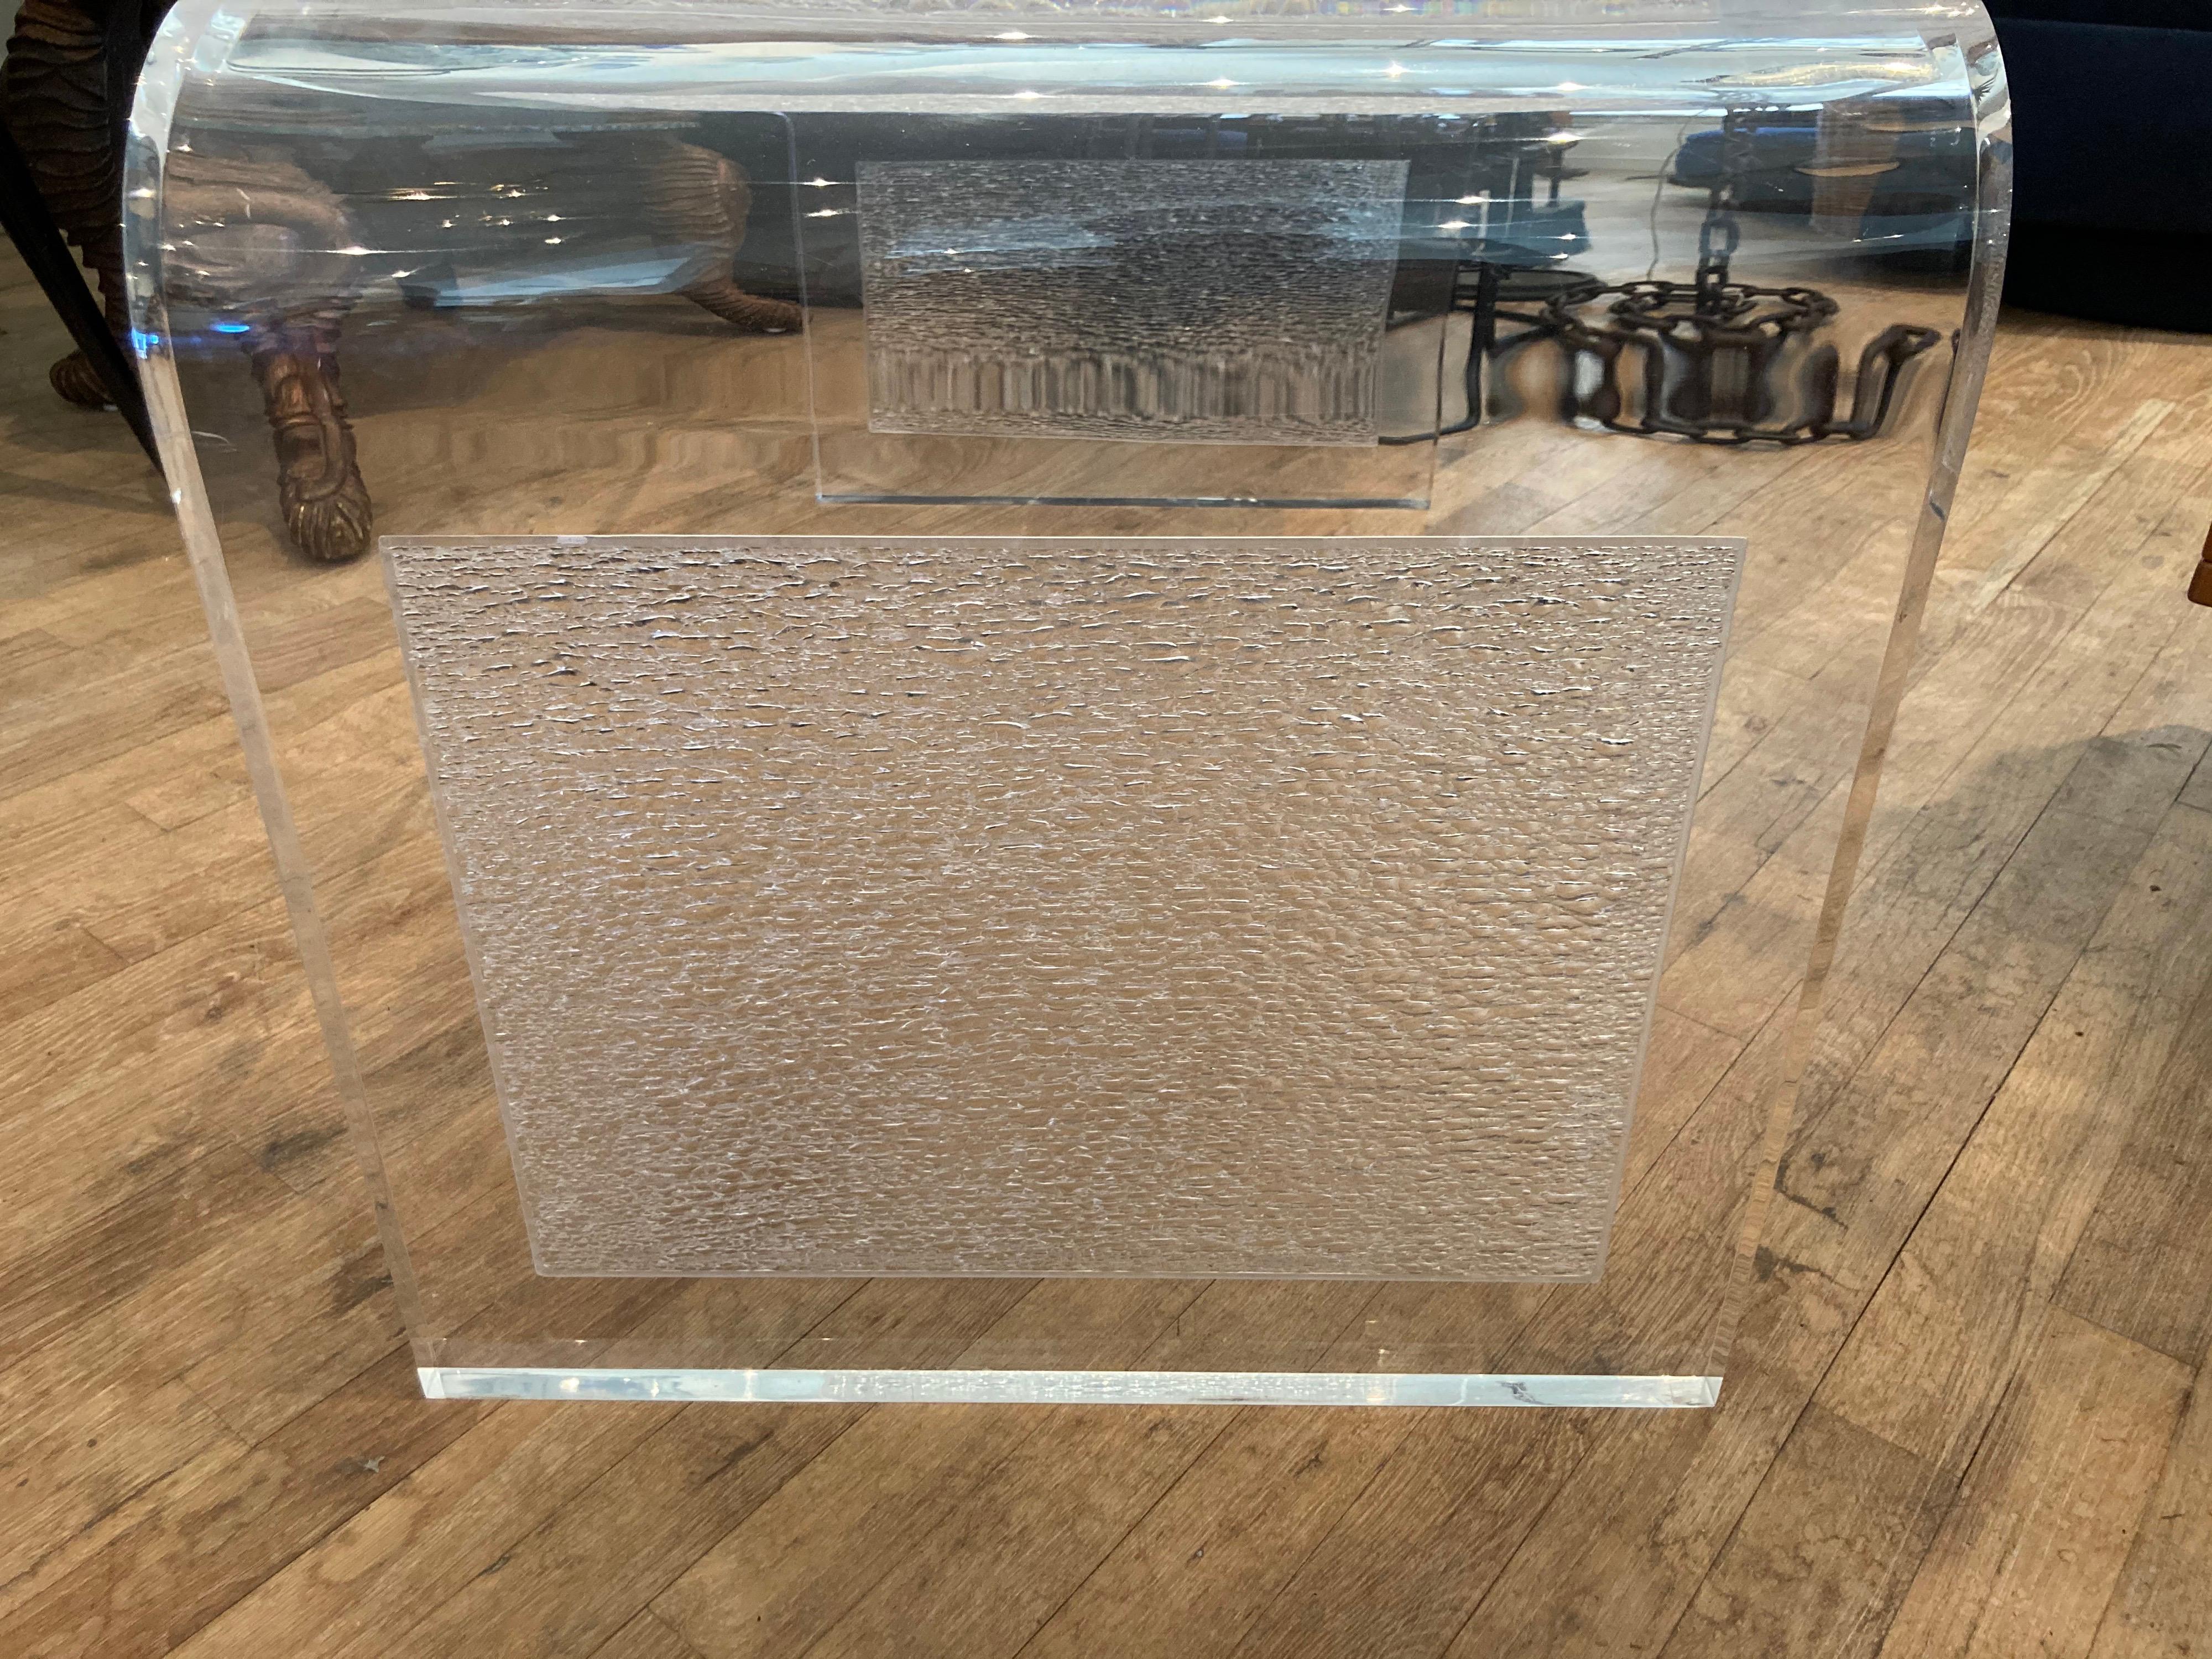 Very substantial lucite waterfall style table with textured interior panels on the sides and underside of the top.... lucite is very thick at 1.25